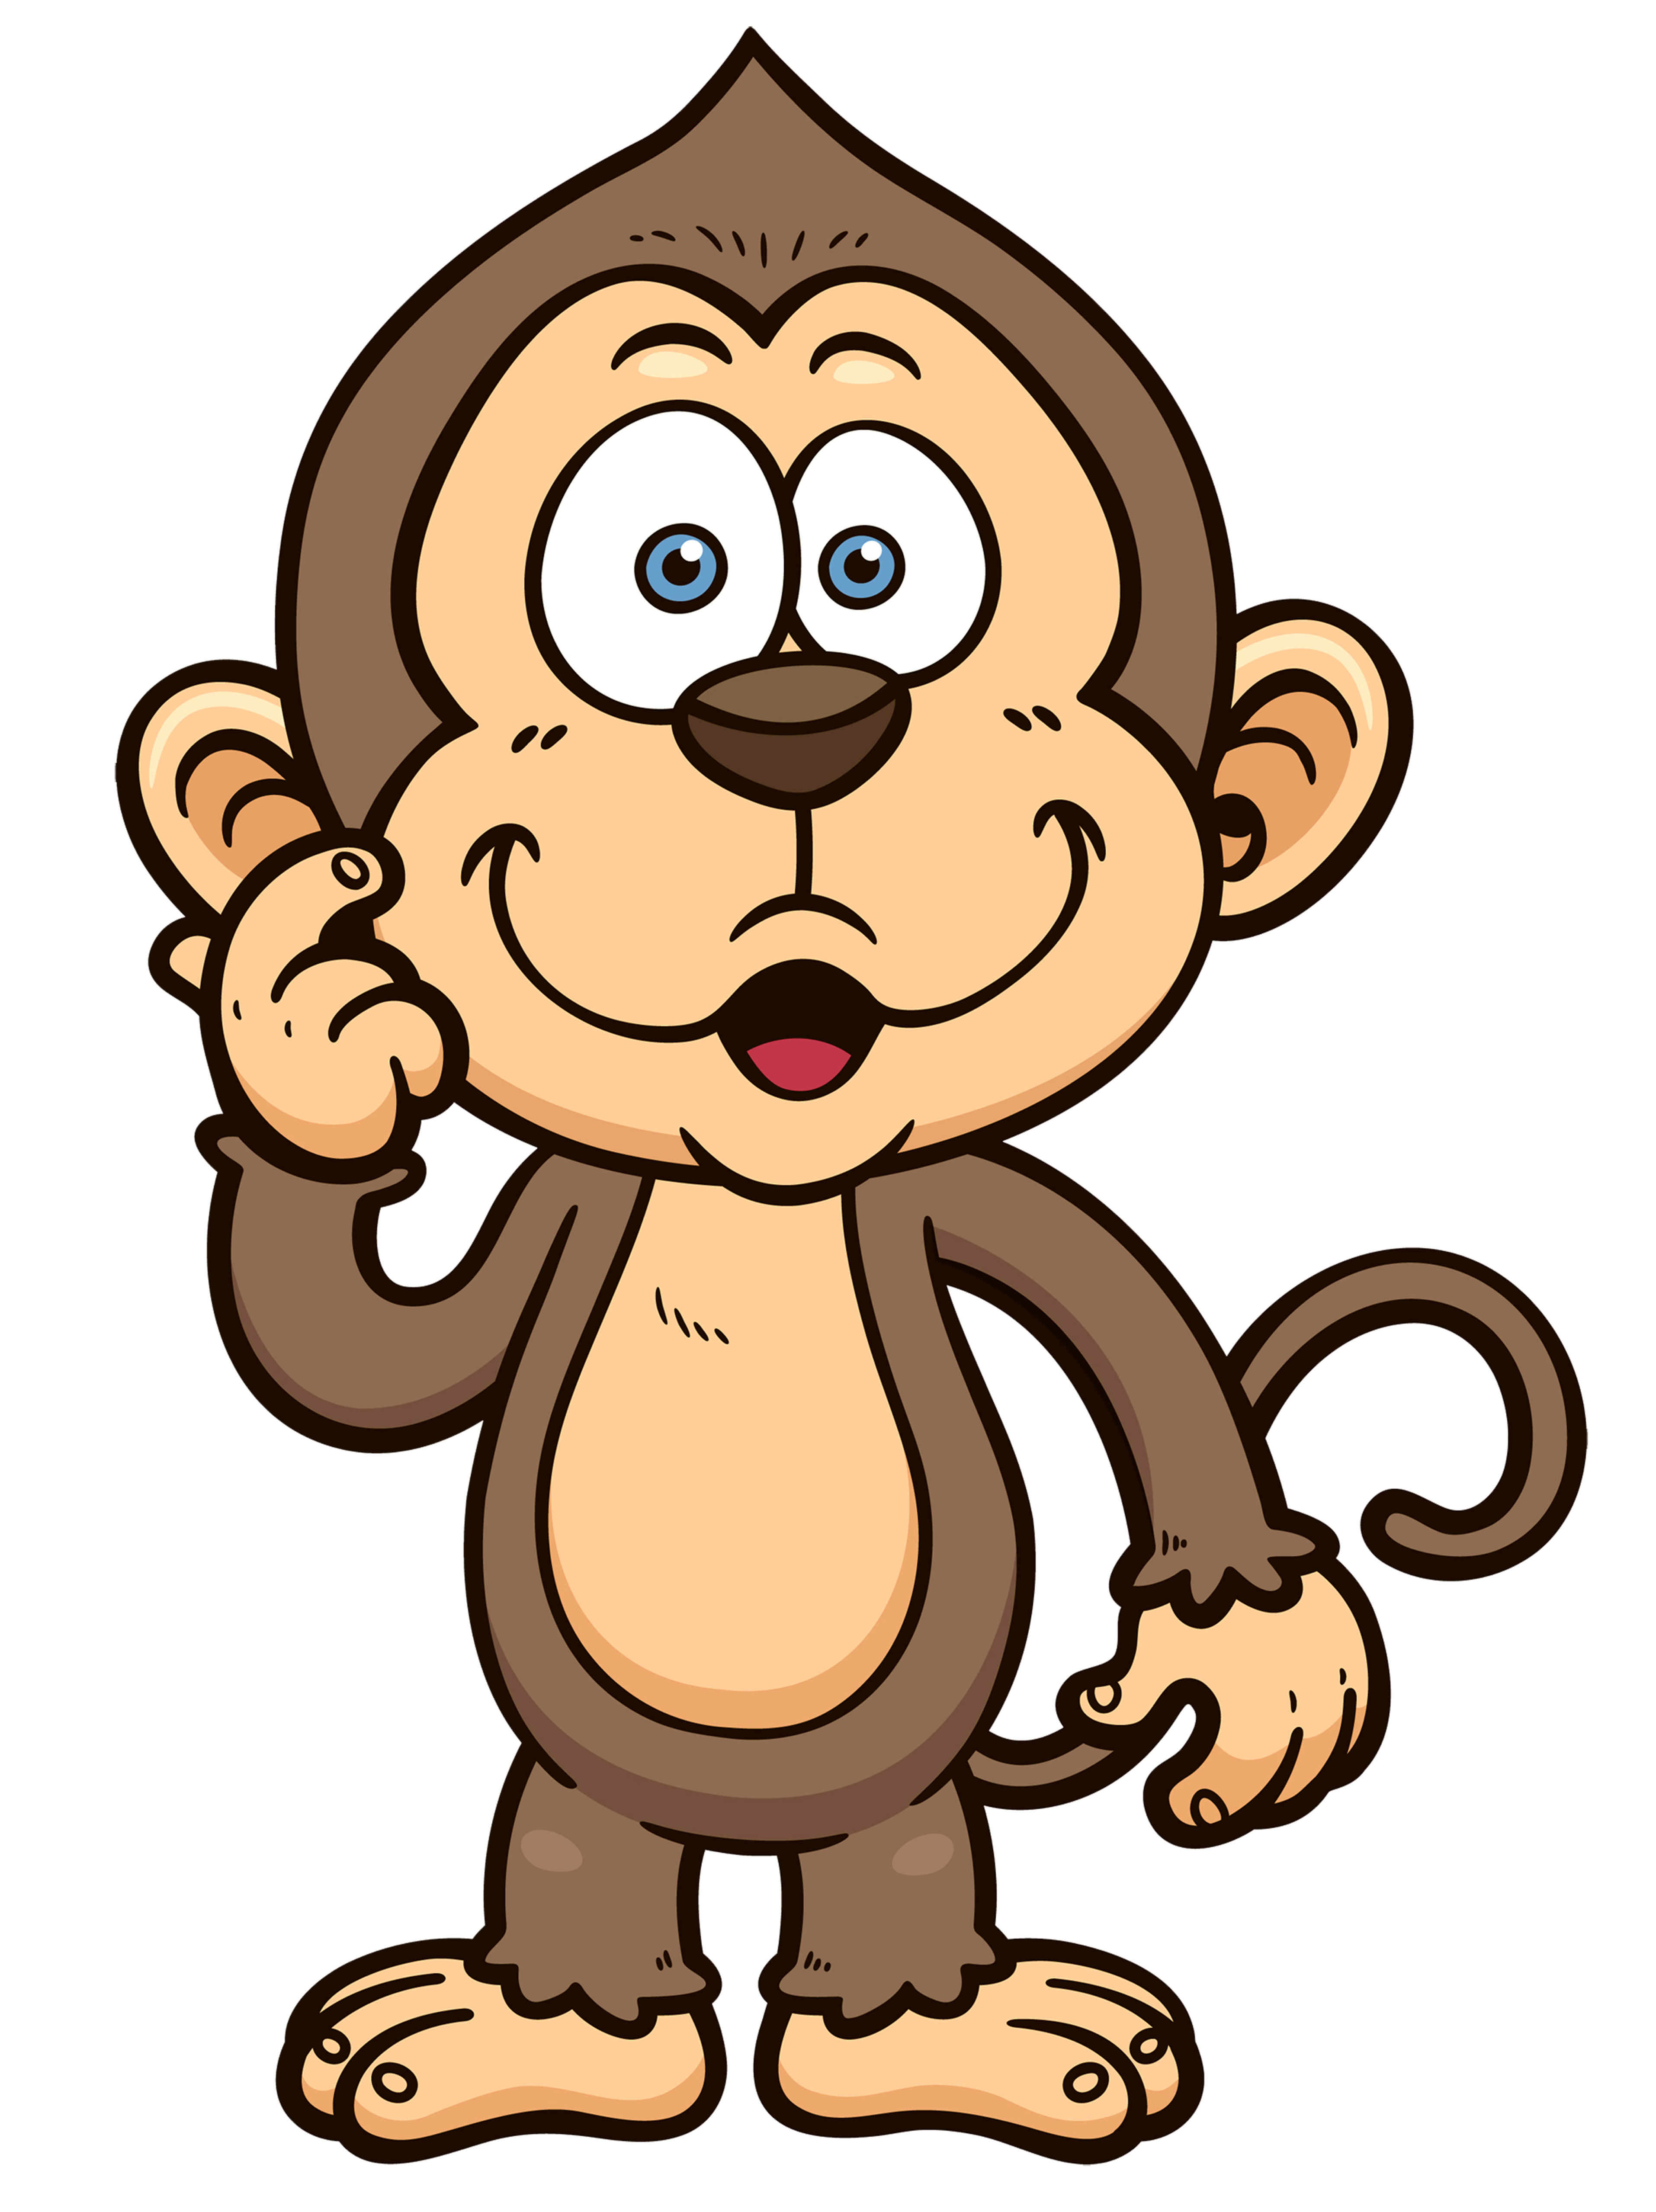 Monkey Cartoon PNG Clipart Image​ | Gallery Yopriceville - High-Quality  Free Images and Transparent PNG Clipart